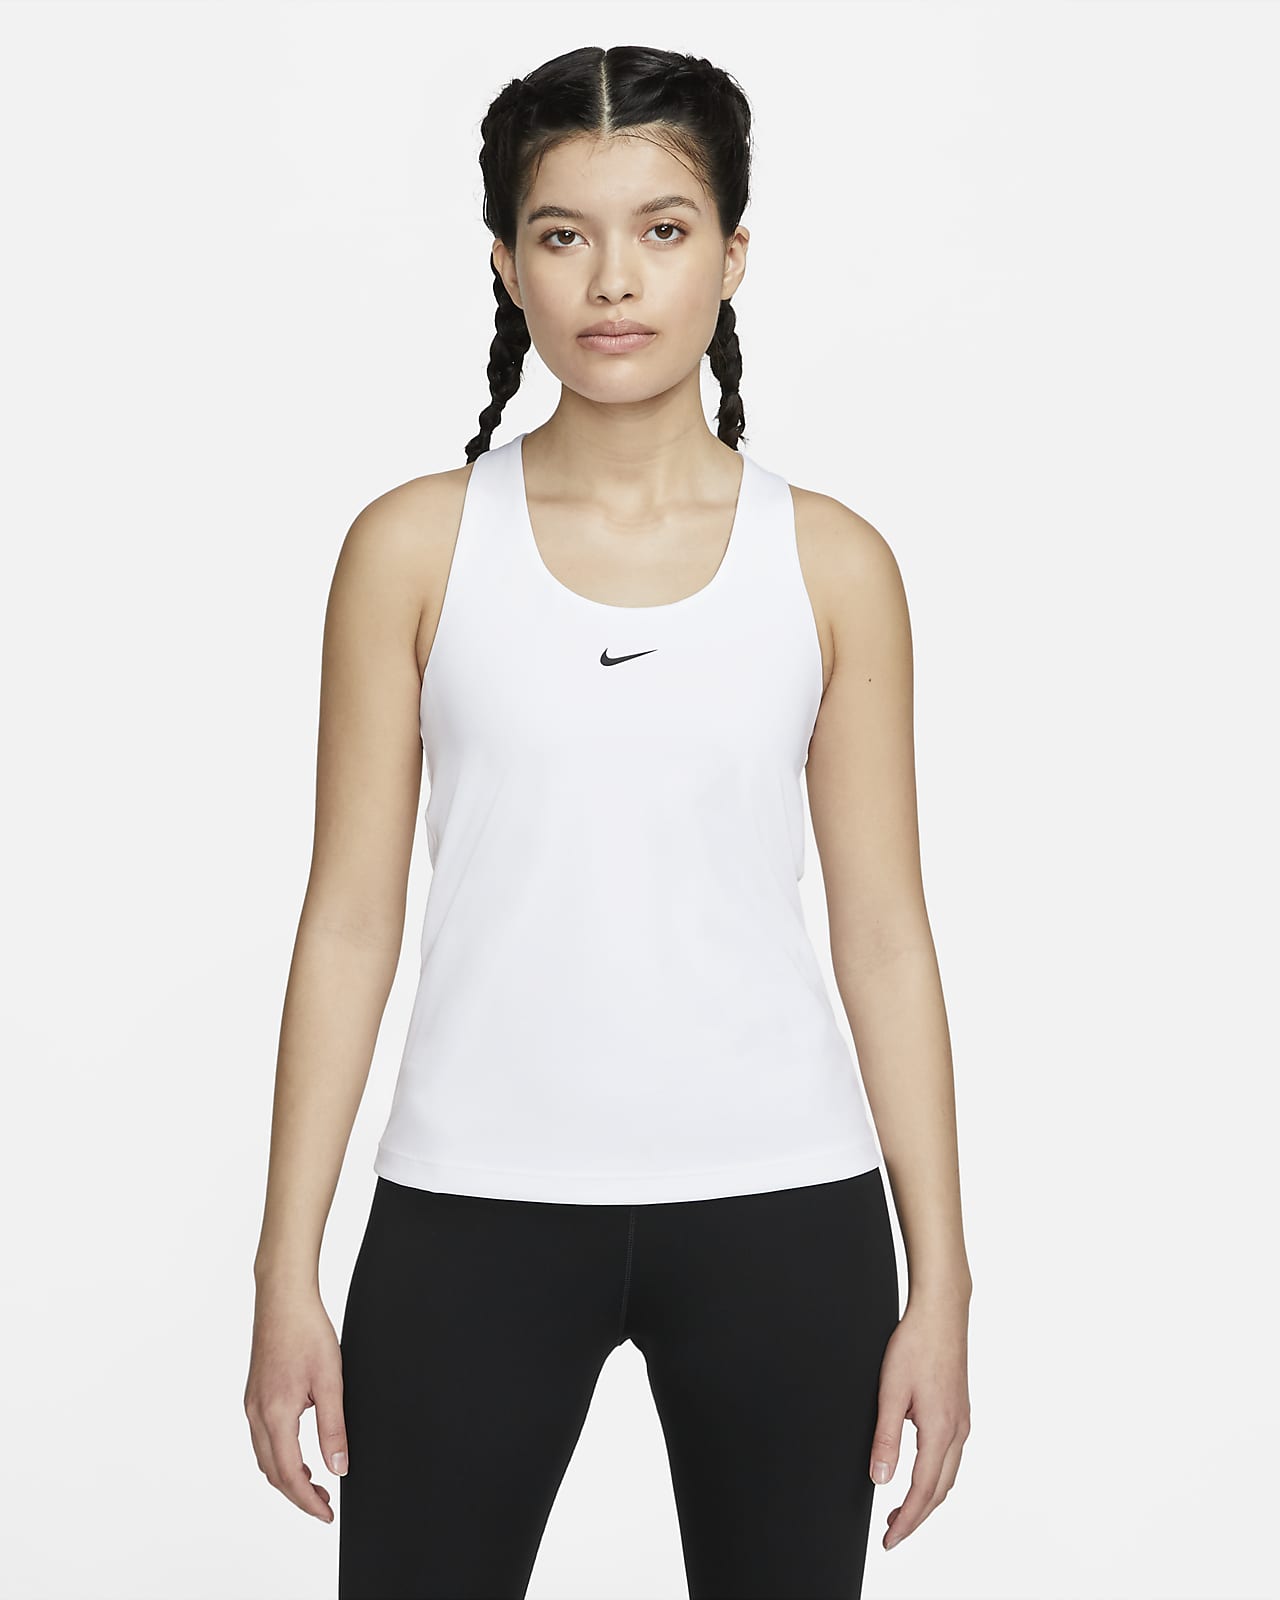 Nike Grey Sports Bra Price in India, Full Specifications & Offers